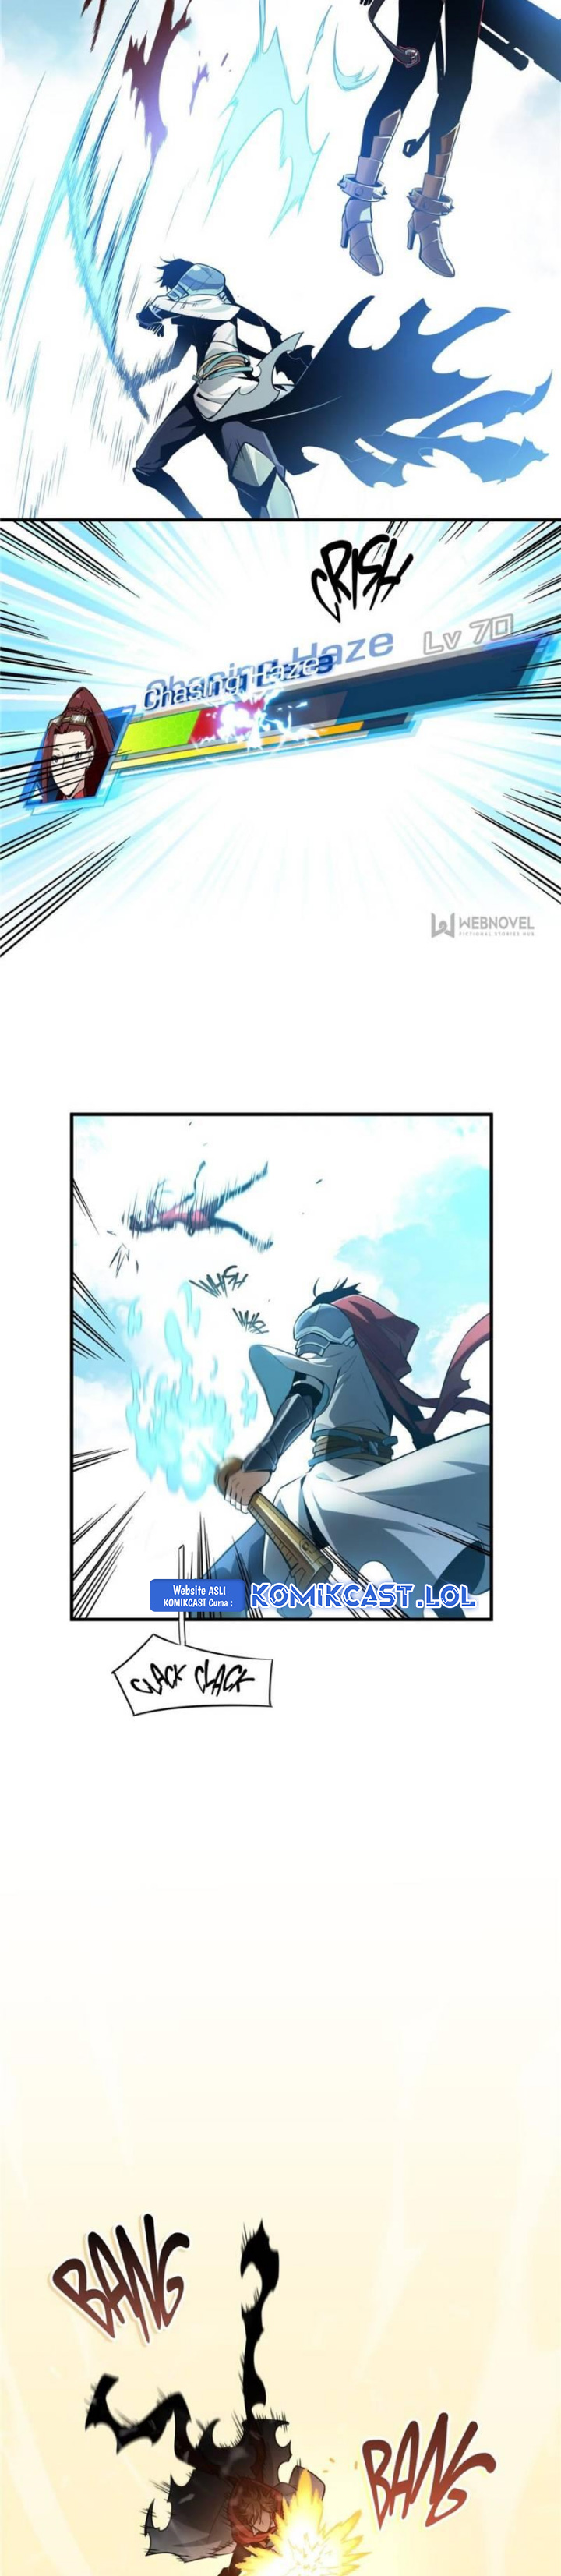 The King’s Avatar (2020) Chapter 29